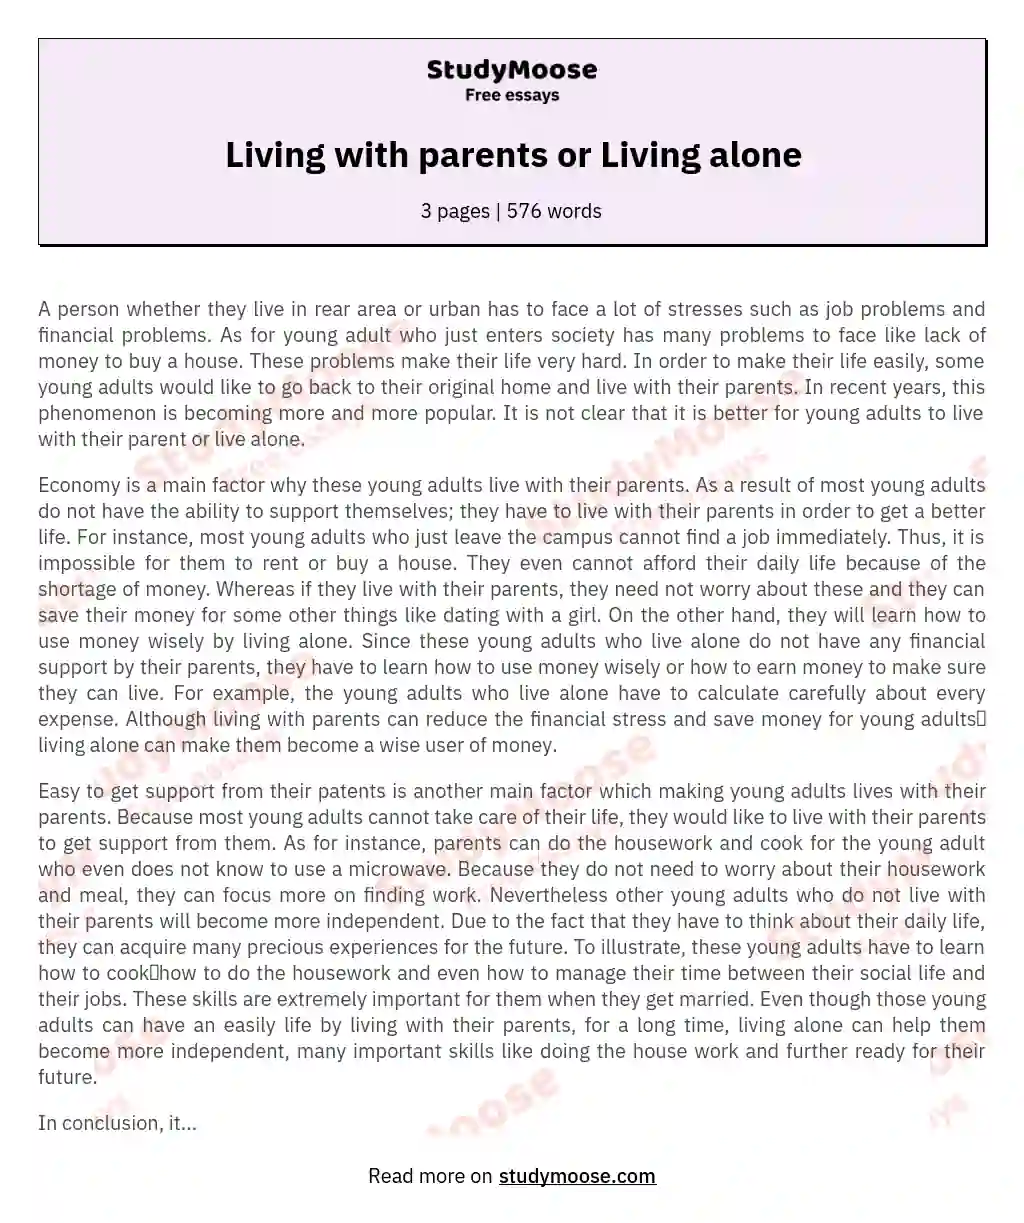 Living with parents or Living alone essay